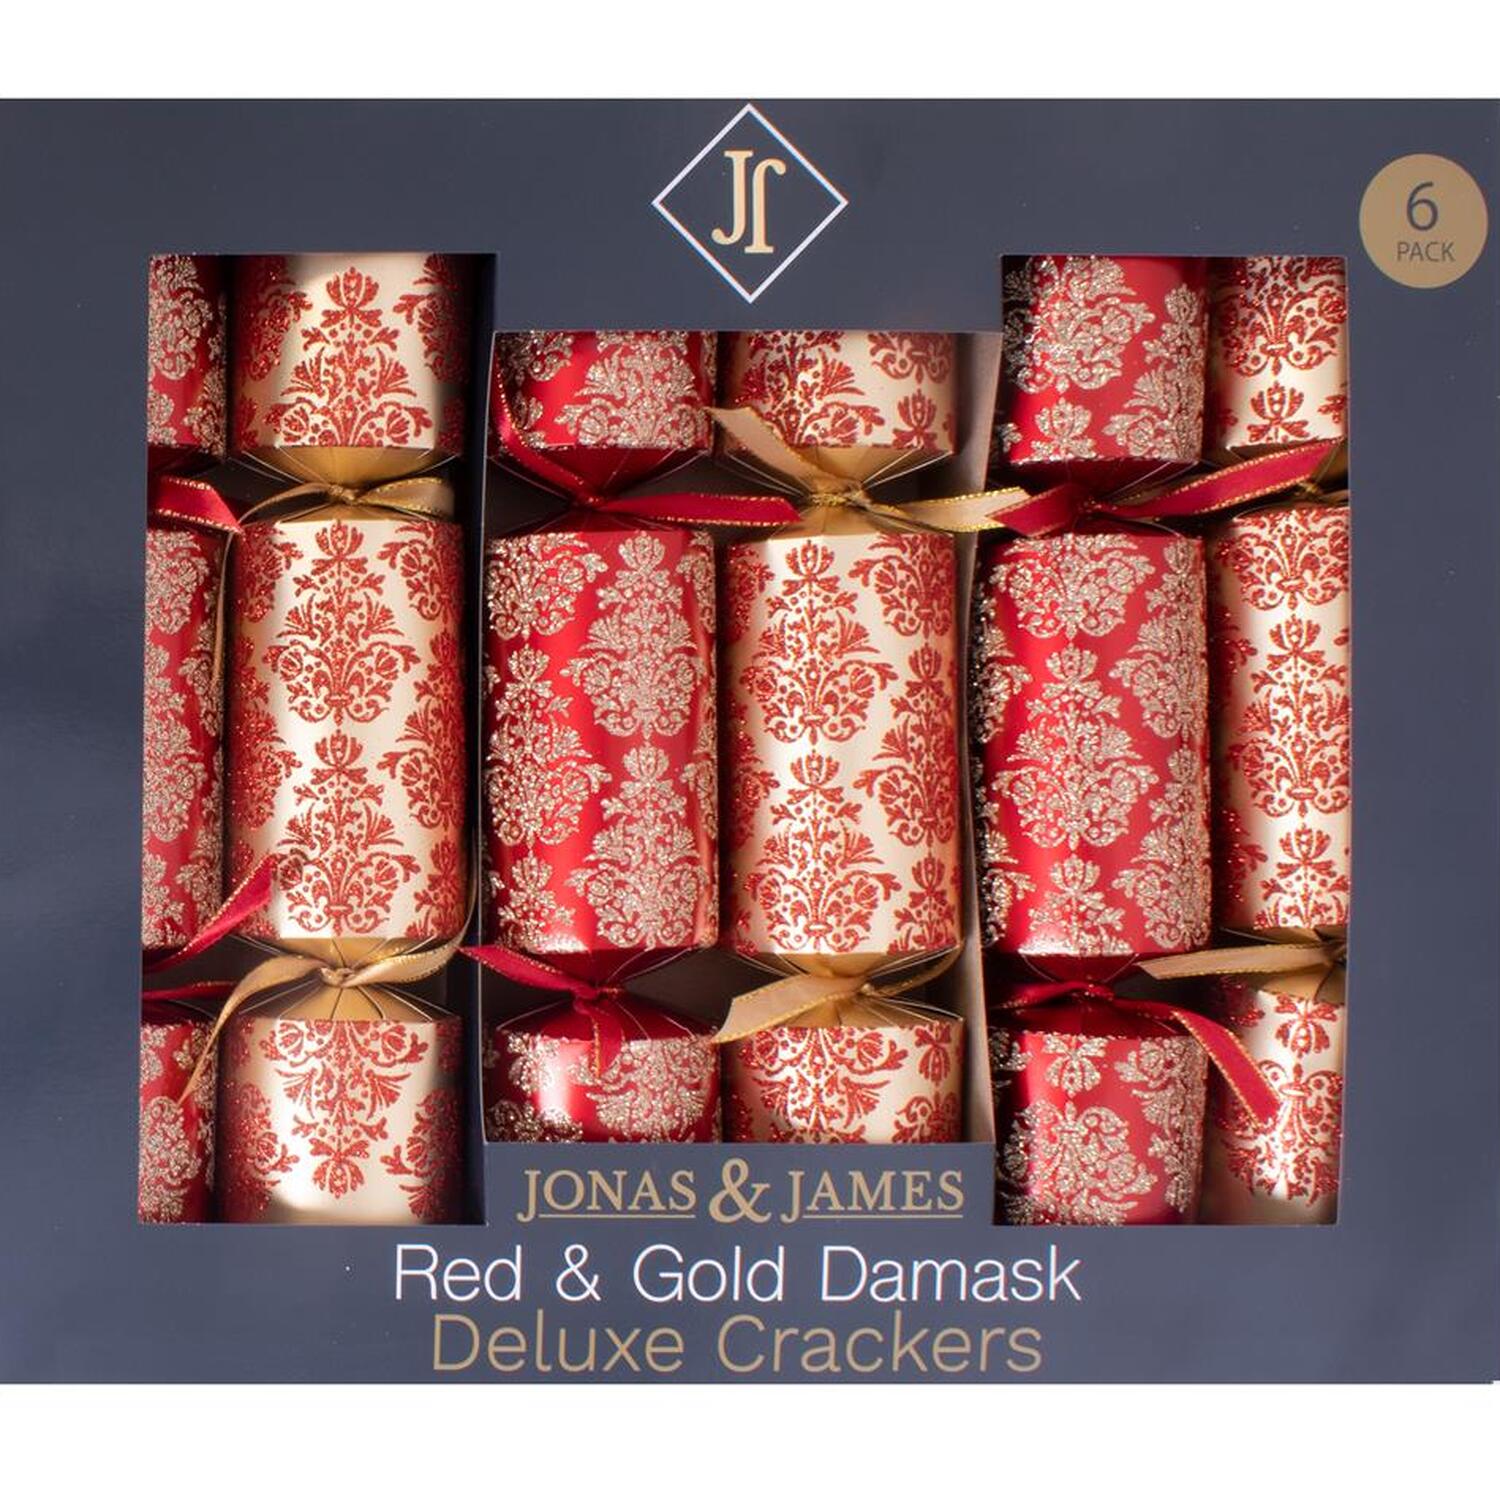 Jonas & James Red and Gold Damask Crackers 6 Pack Image 1